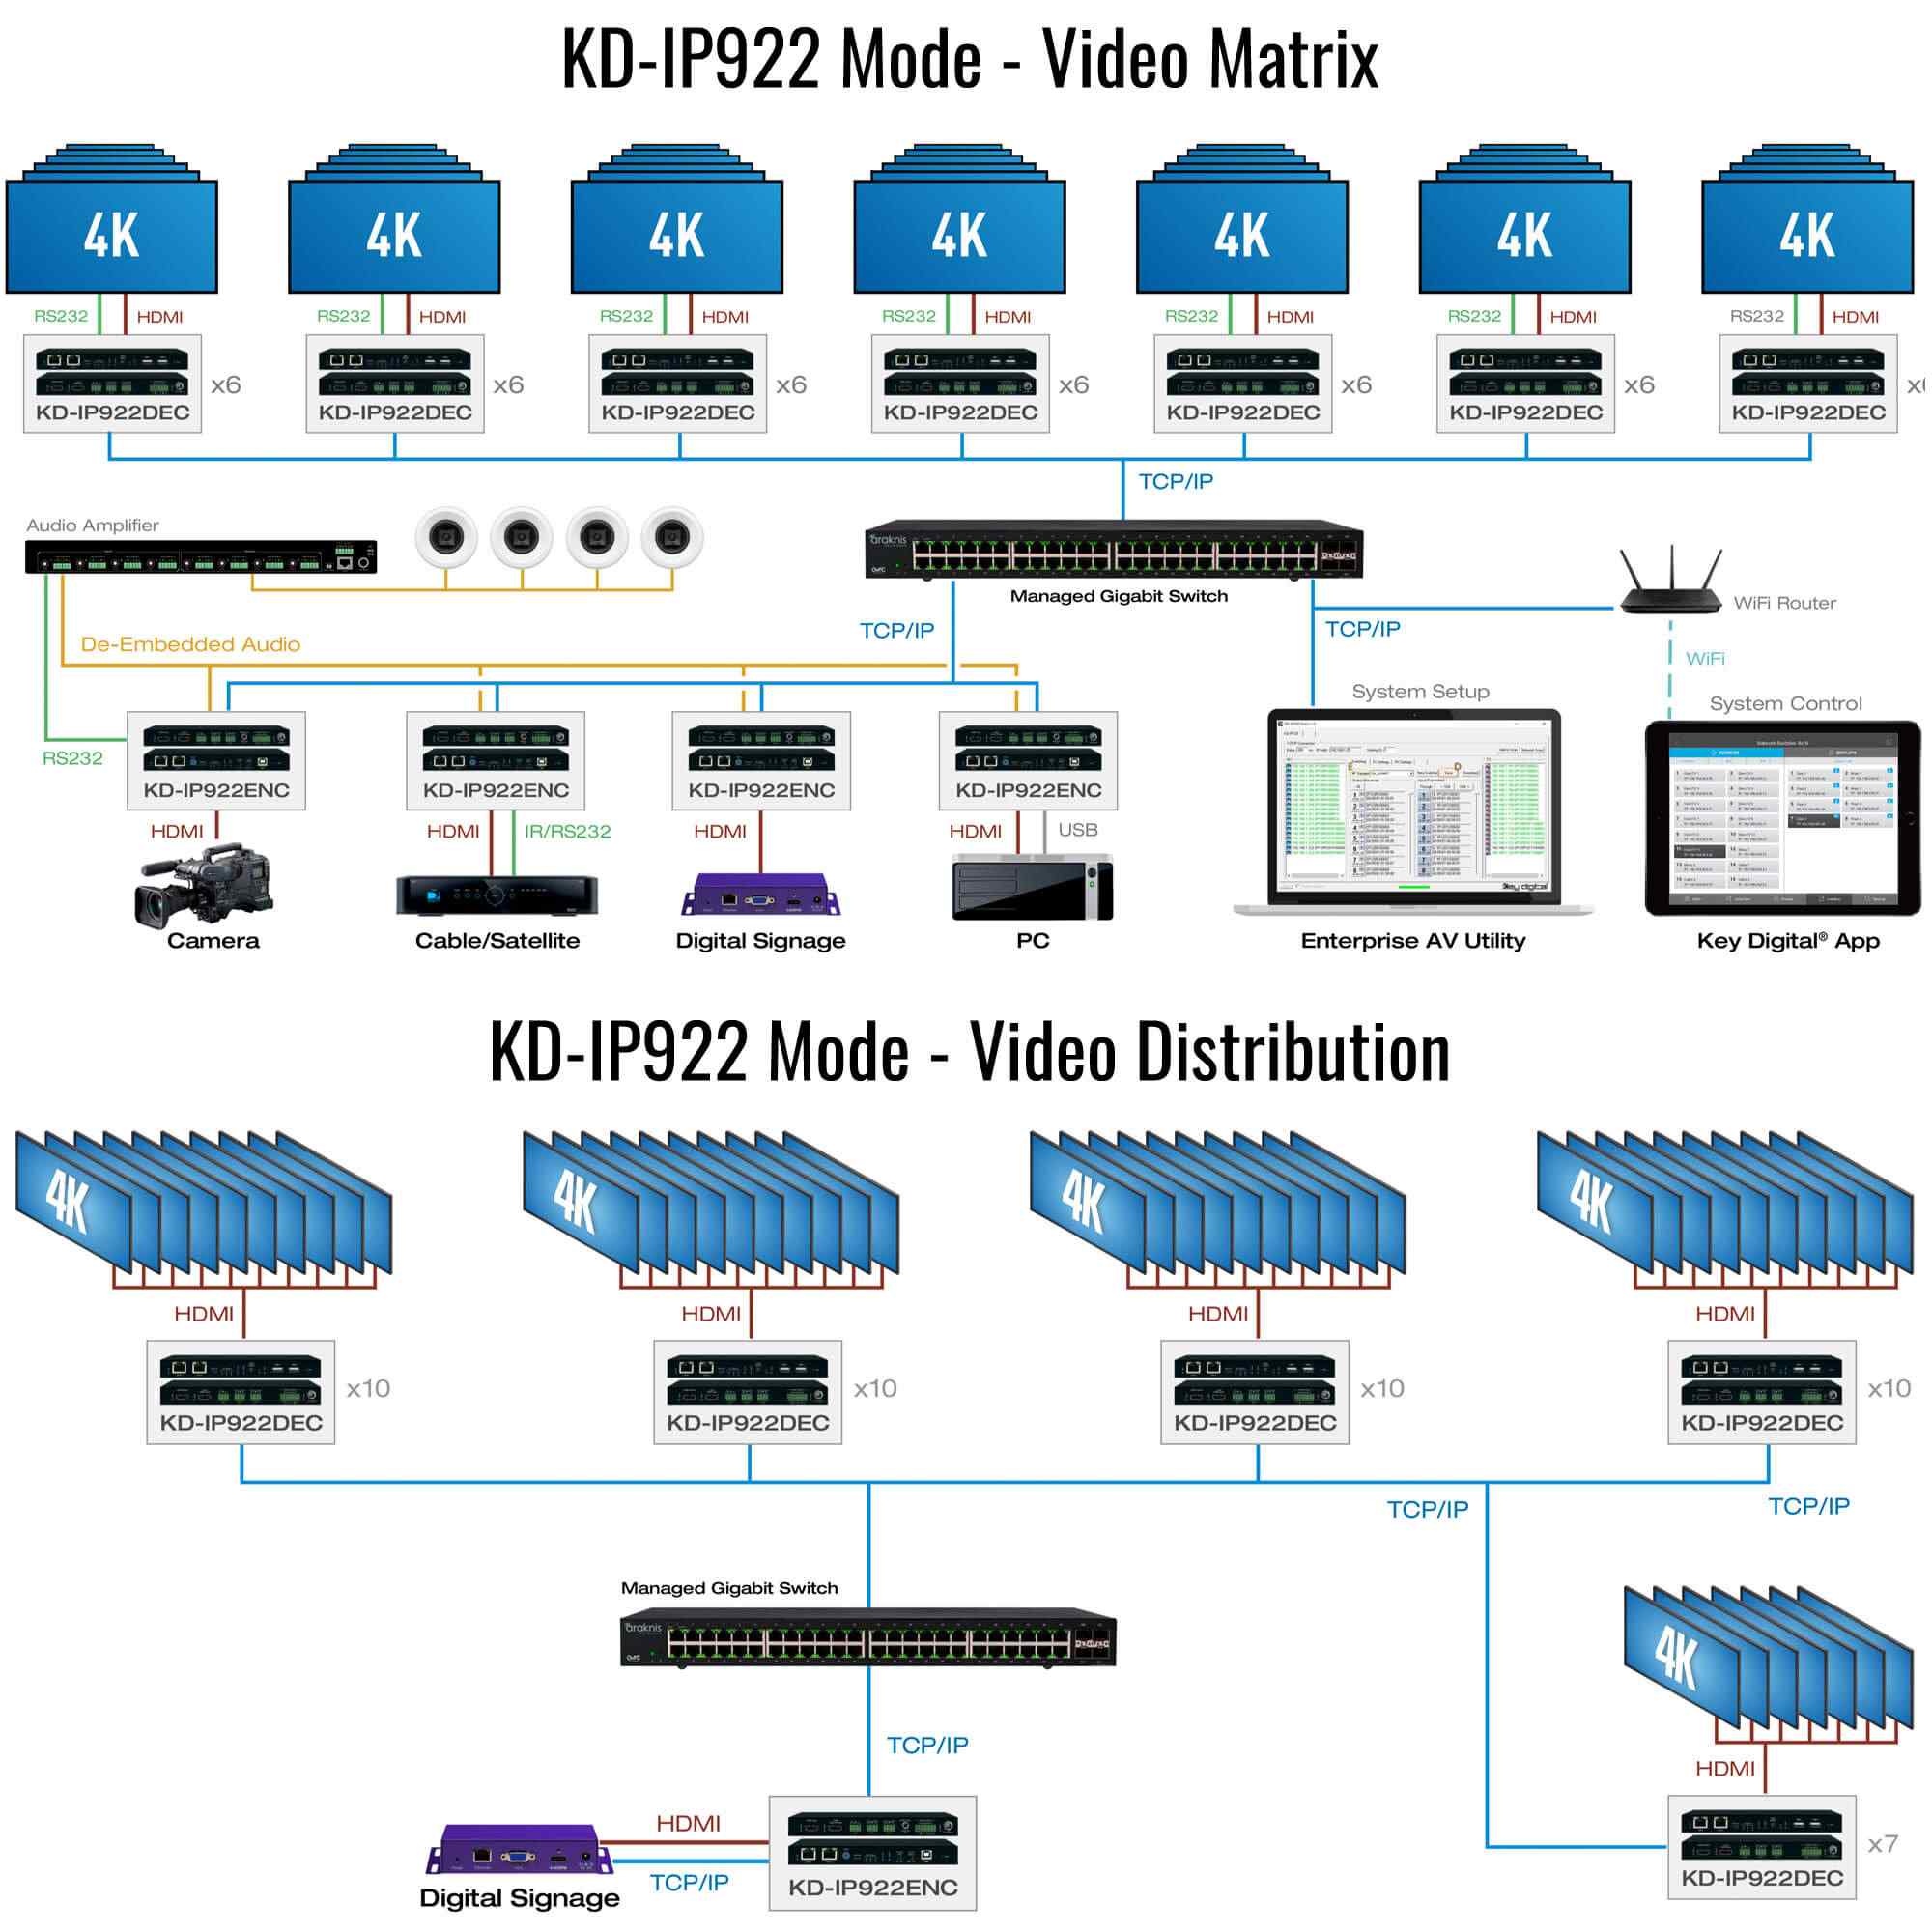 Thumbnail of Example Diagram showing video matrix and distribution mode of av over ip encoder